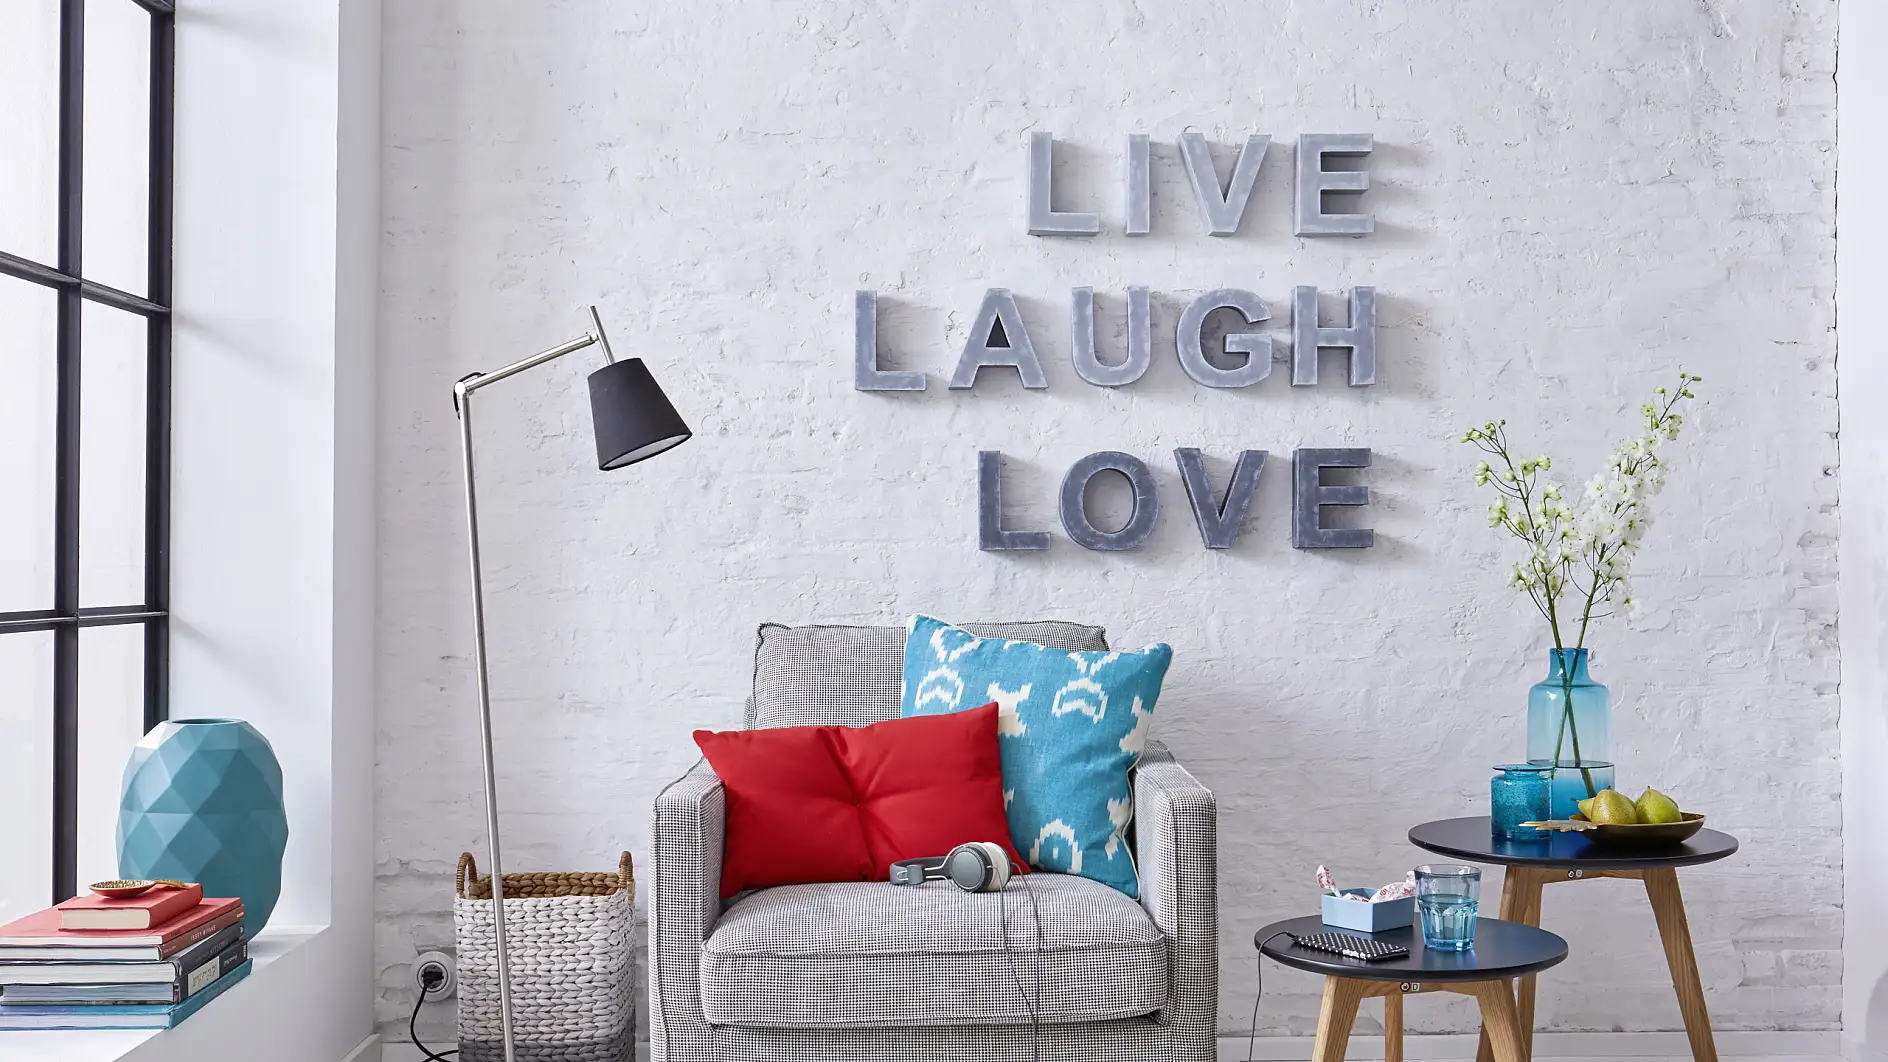 Create your own wall letters in the shabby chic look!